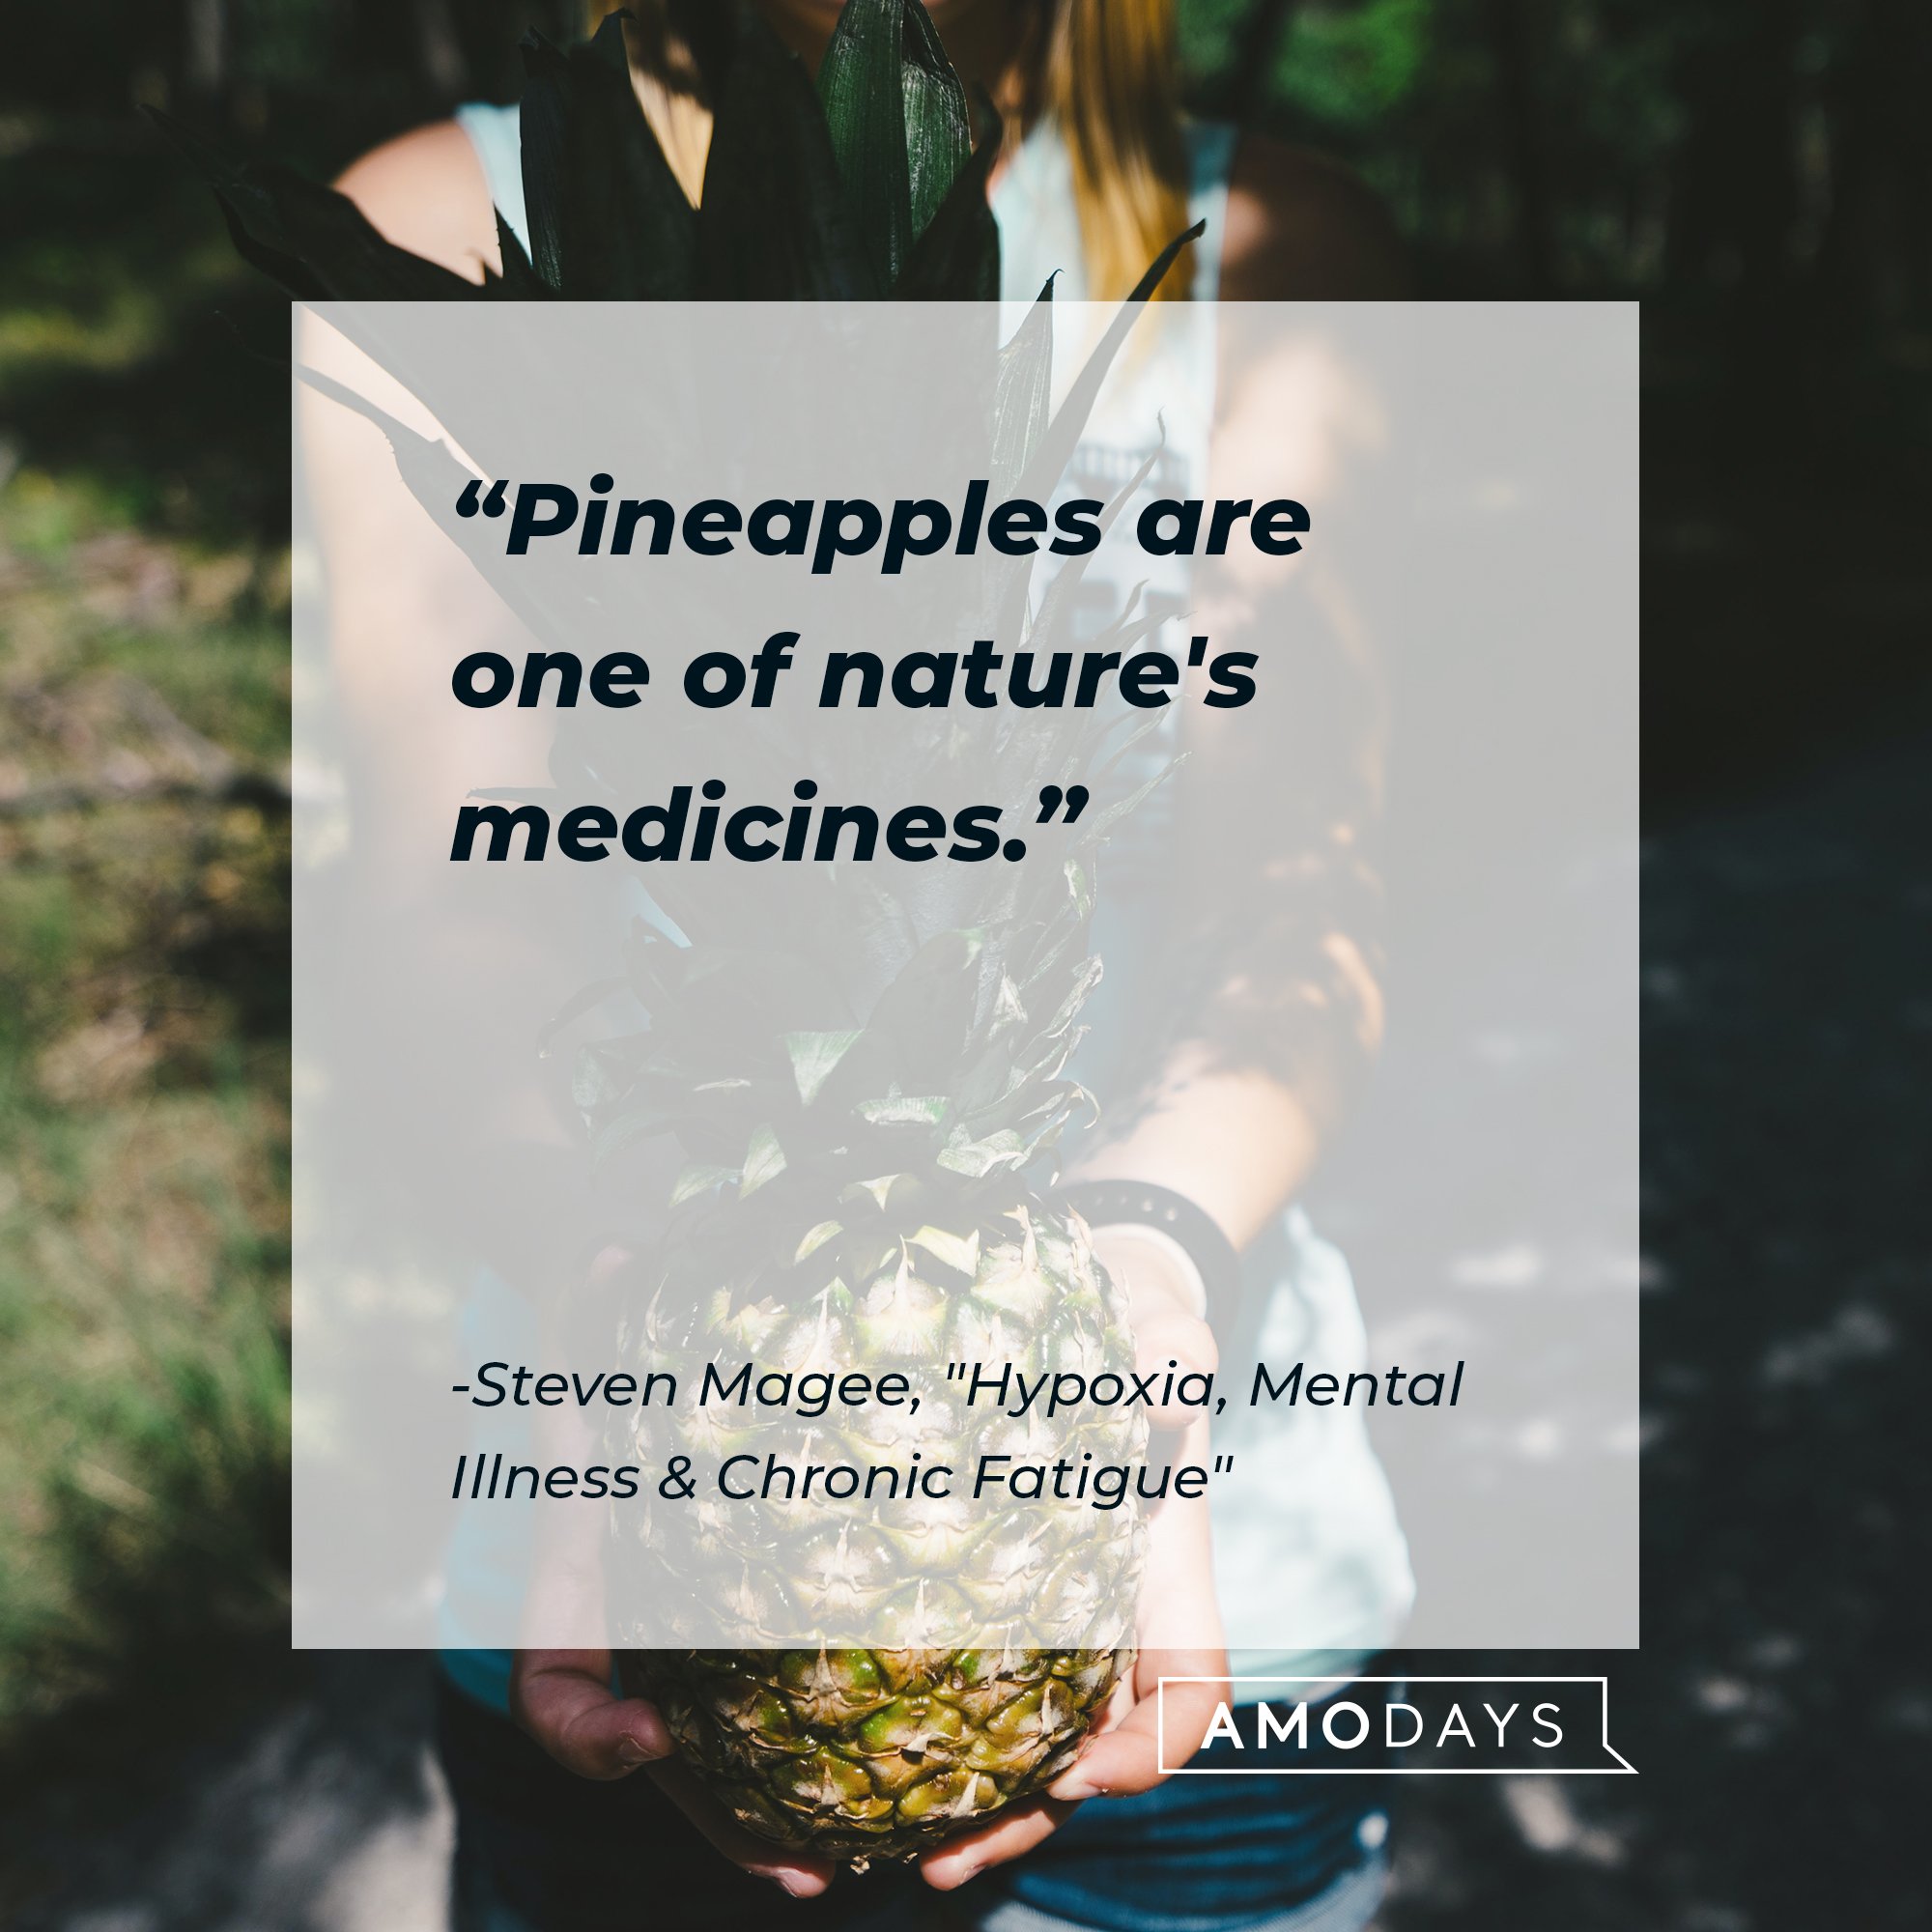 Steven Magee's "Hypoxia, Mental Illness & Chronic Fatigue" quote: "Pineapples are one of nature's medicines." | Image: AmoDays